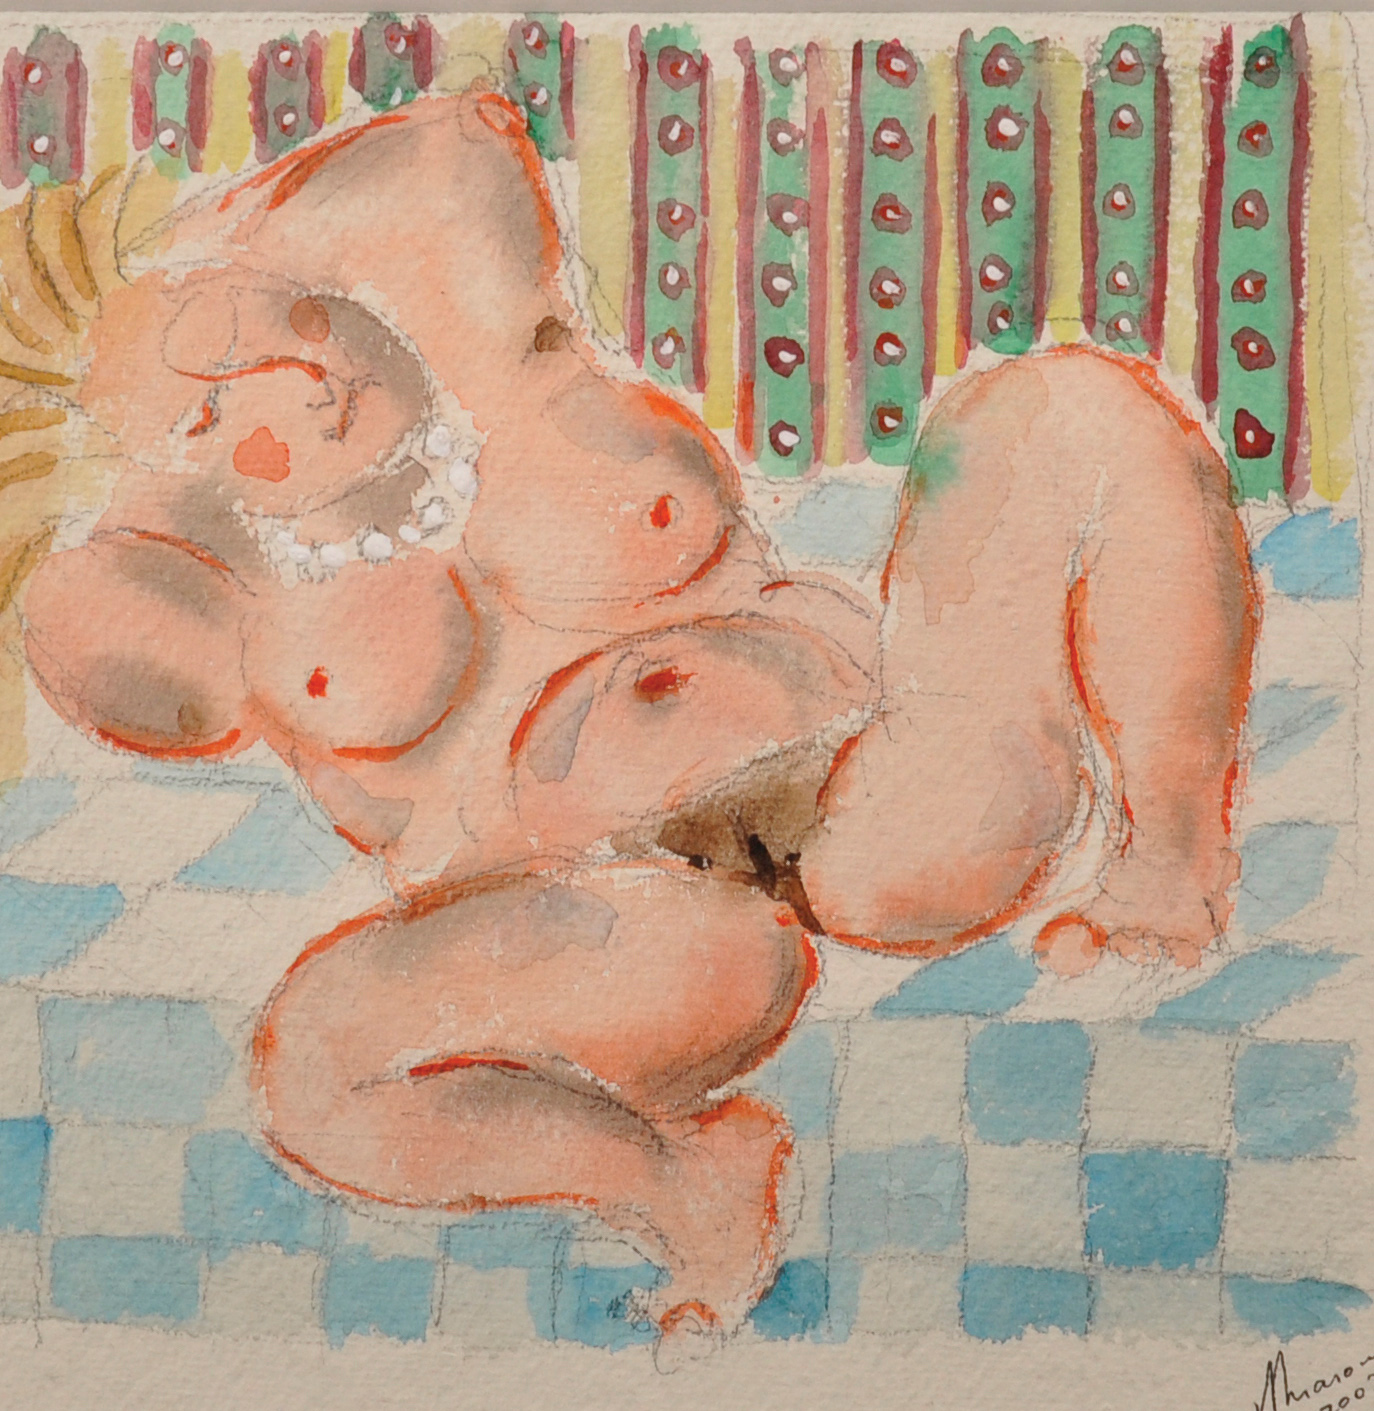 Jeremy Mason (20th -21st Century) British. Study of a Naked Woman Reclining, Watercolour, Signed and